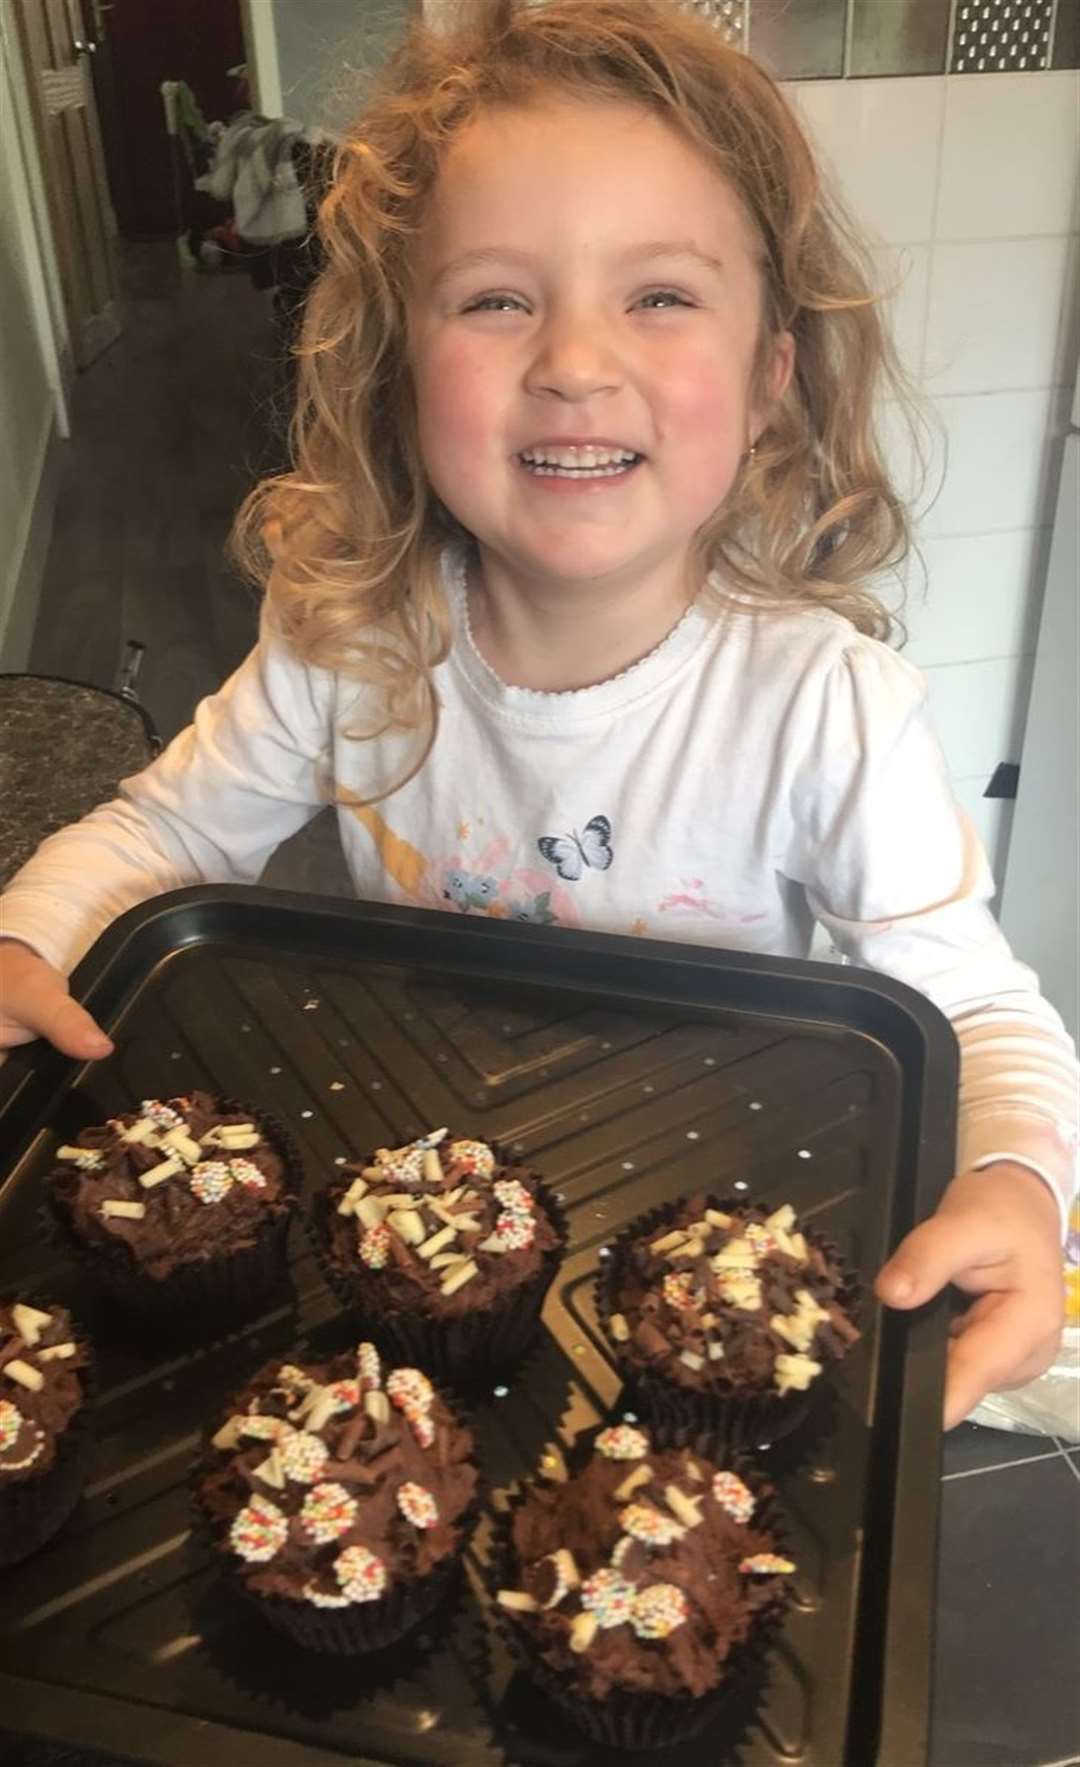 Lillia Halls made cakes for her grandad to leave on his doorstep for his birthday